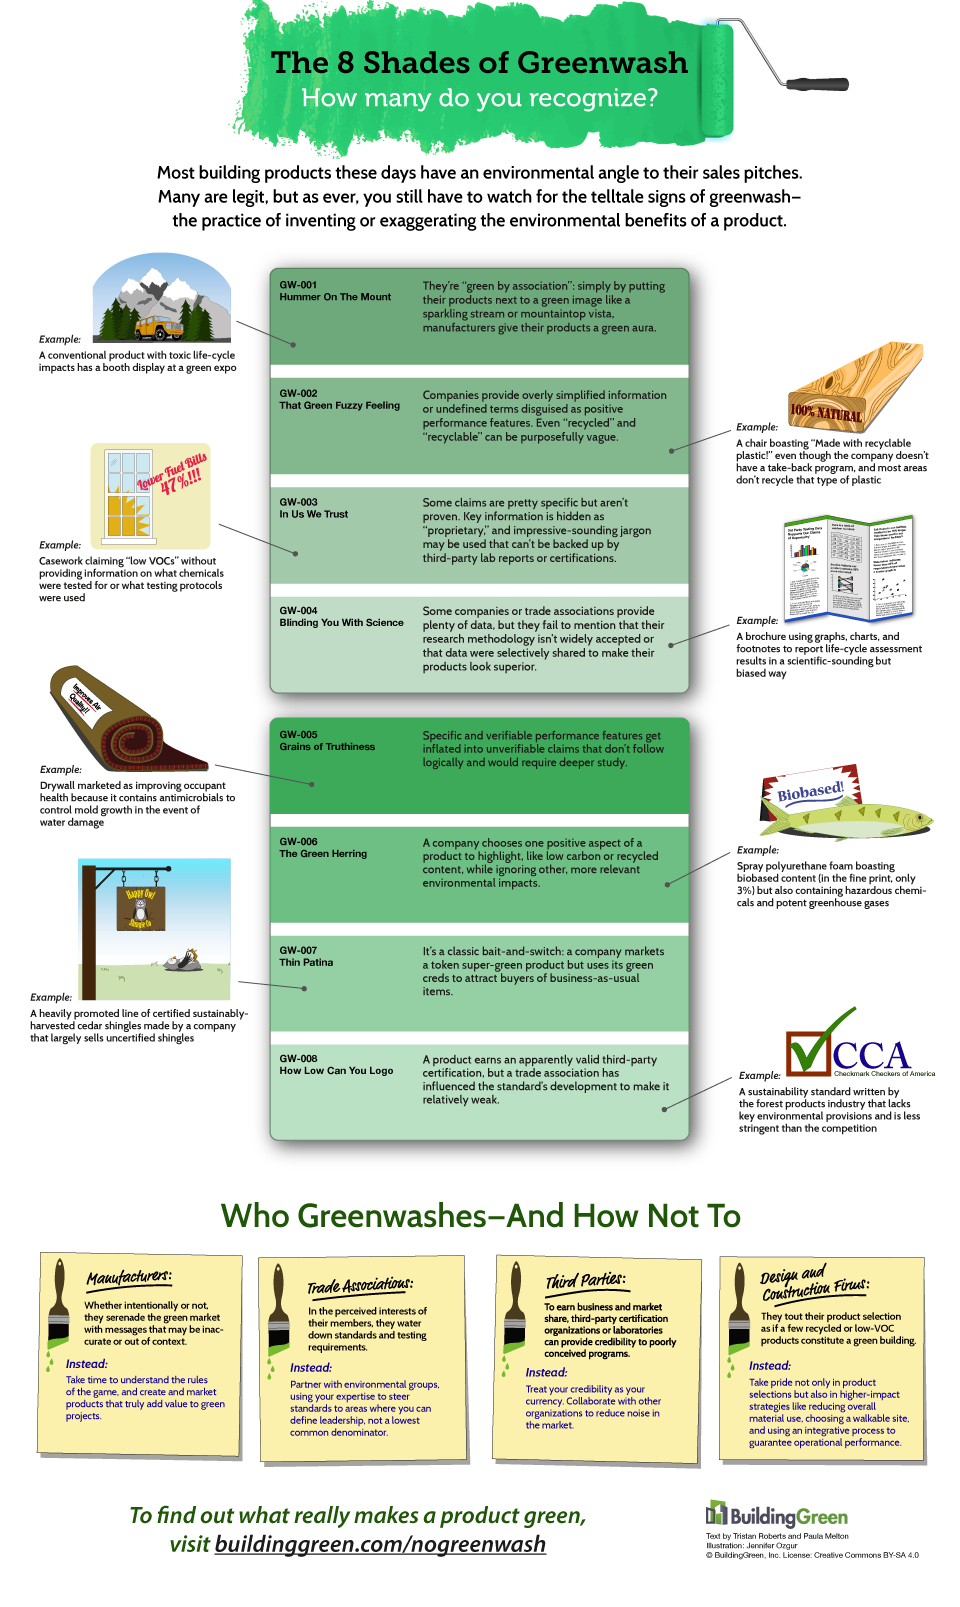 The 8 Shades of Greenwash: How Many Do You Recognize?